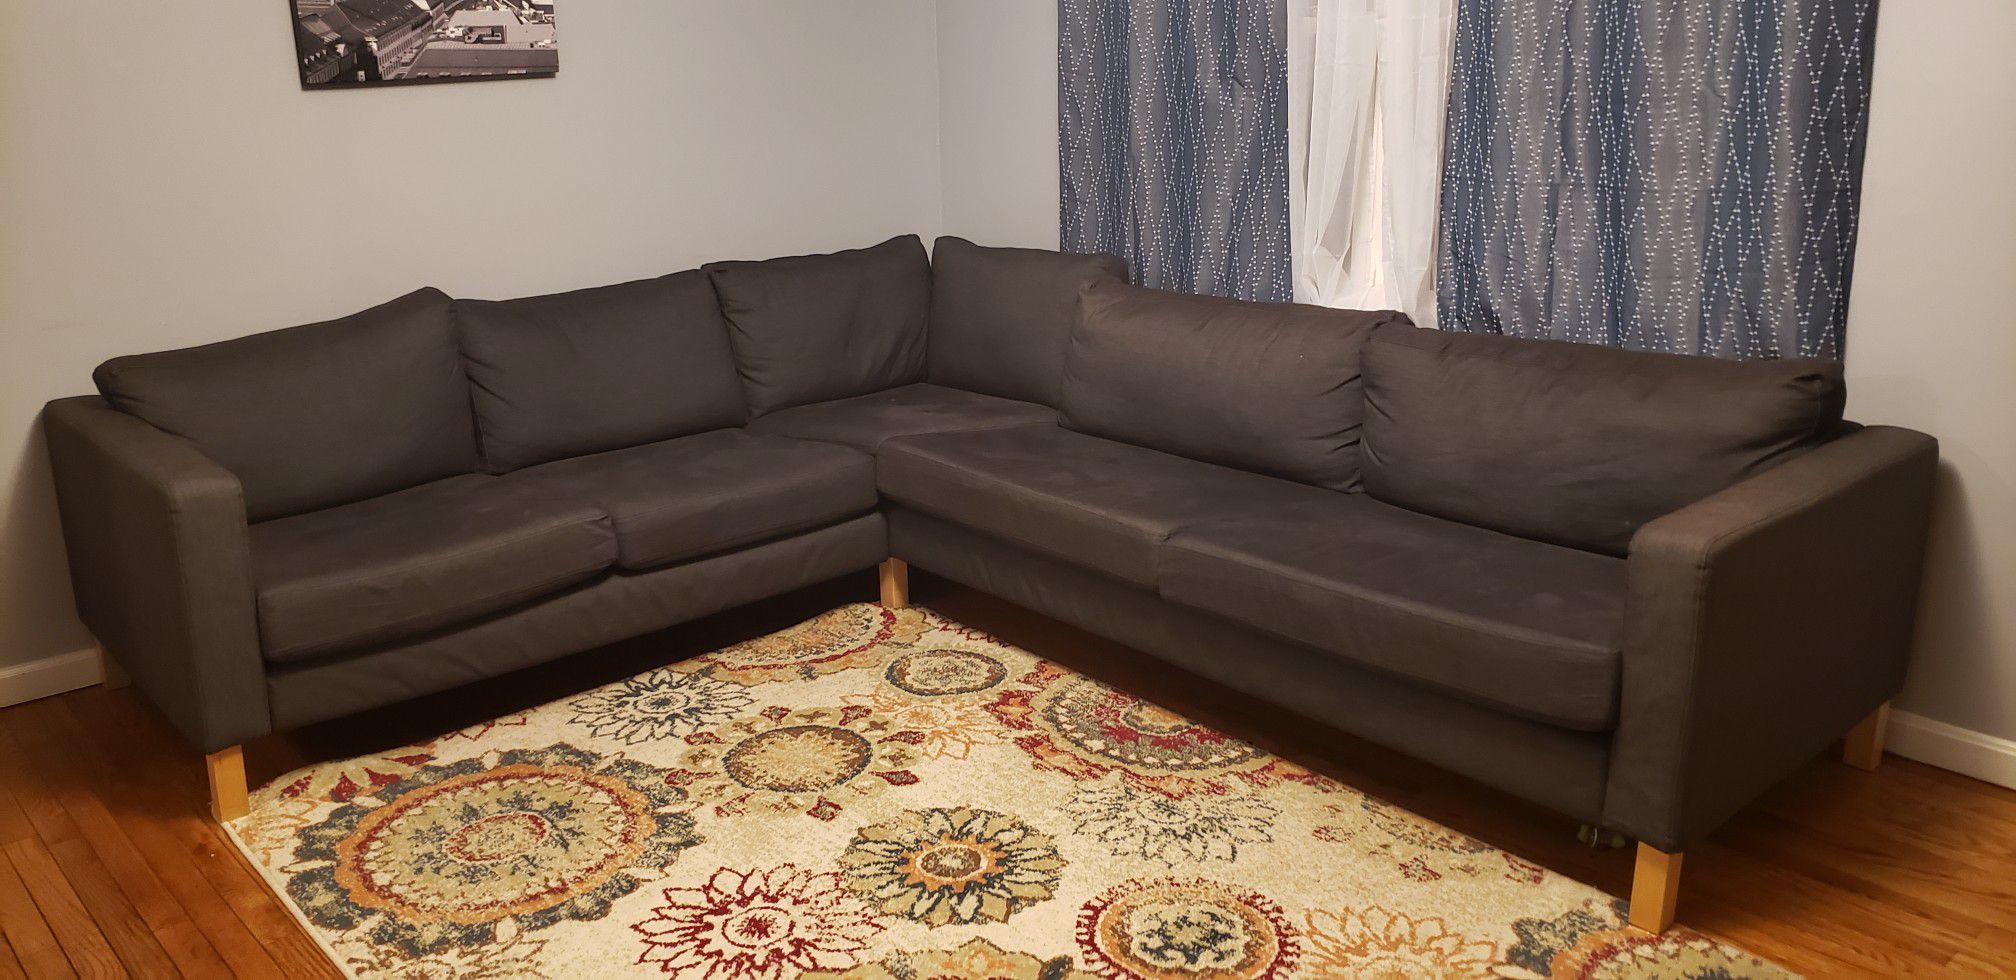 large couch